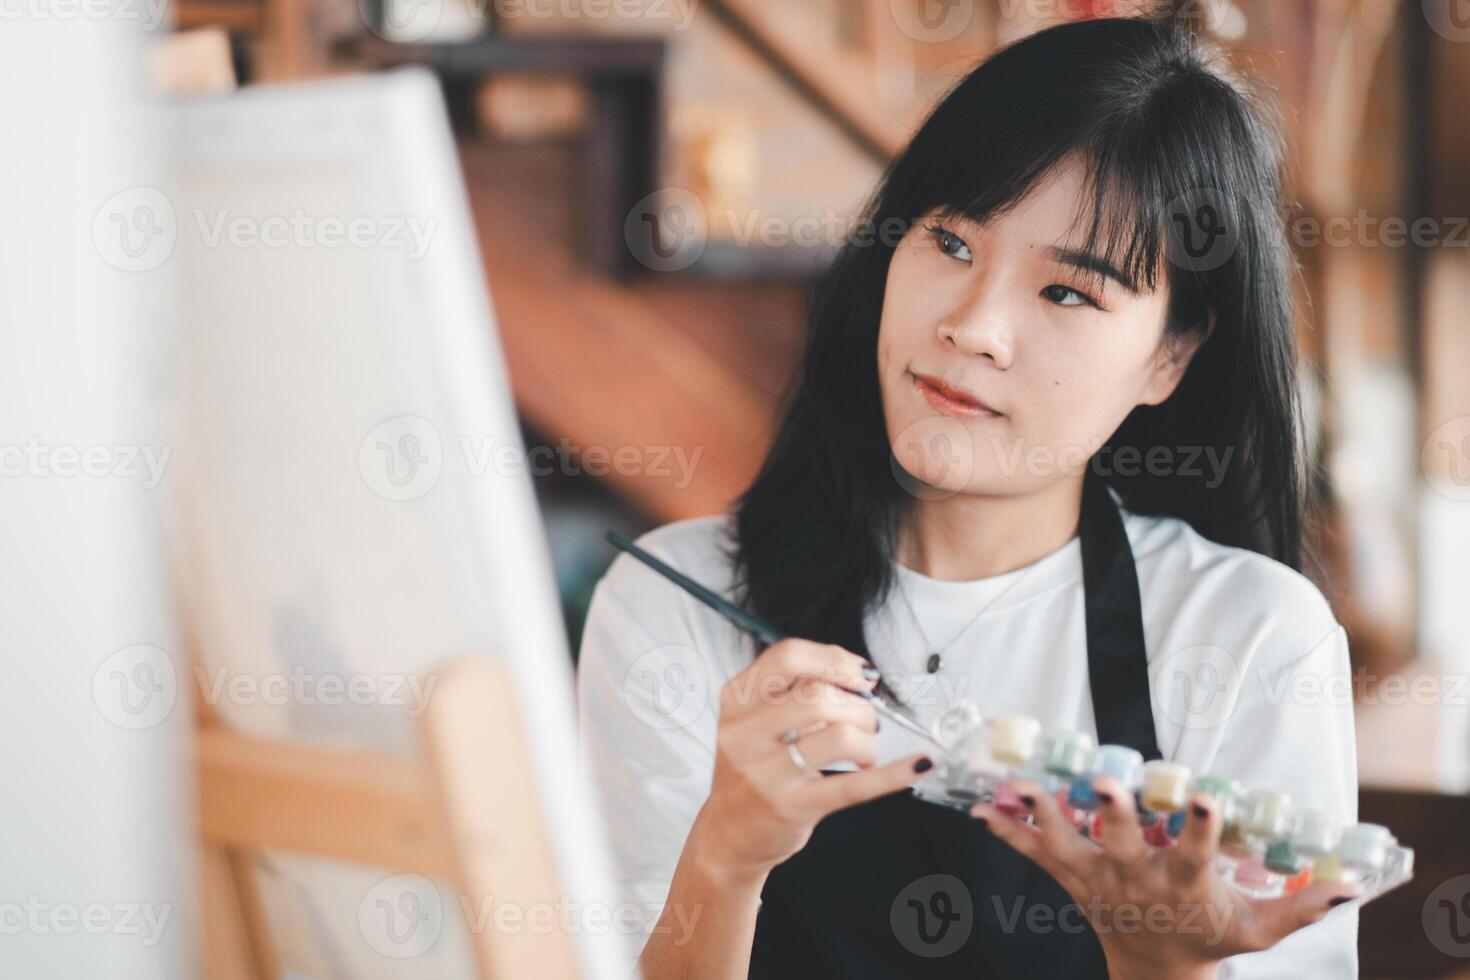 An aspiring artist with a serene expression delicately applies brush strokes to a canvas in a cozy, well-decorated studio filled with creative inspiration. photo